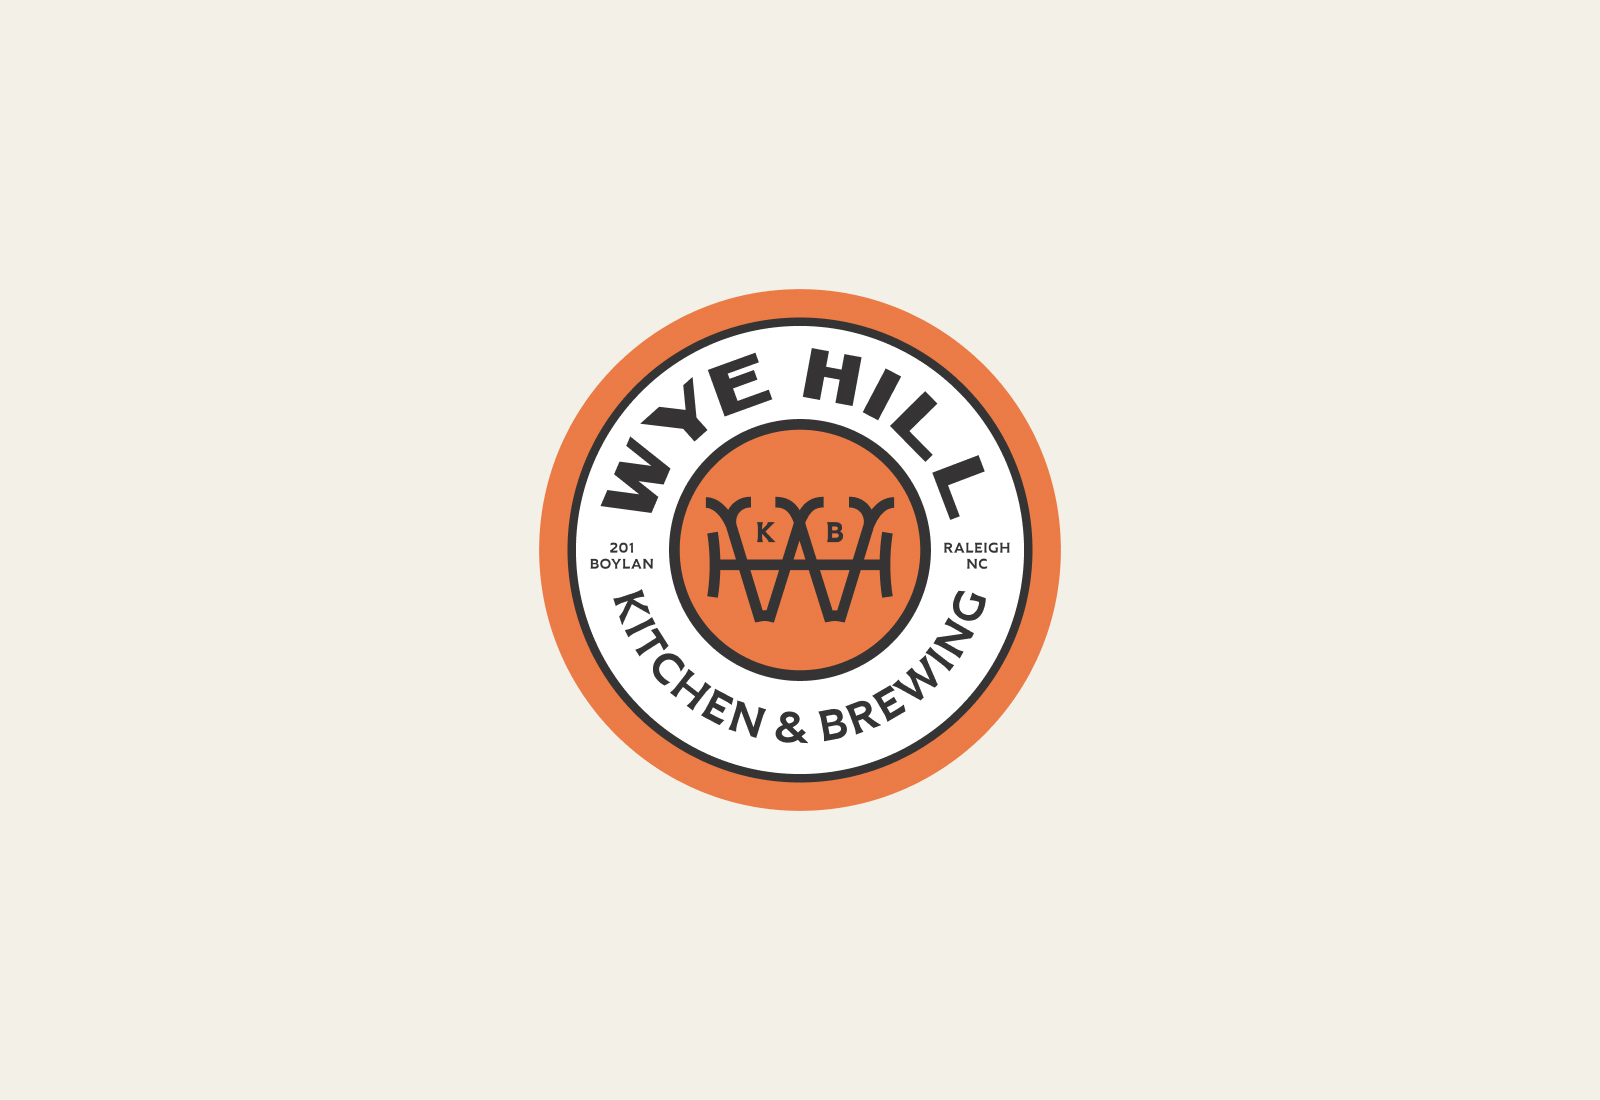 Locomotive Badge | Brand Identity for Wye Hill Kitchen and Brewing in Raleigh, NC